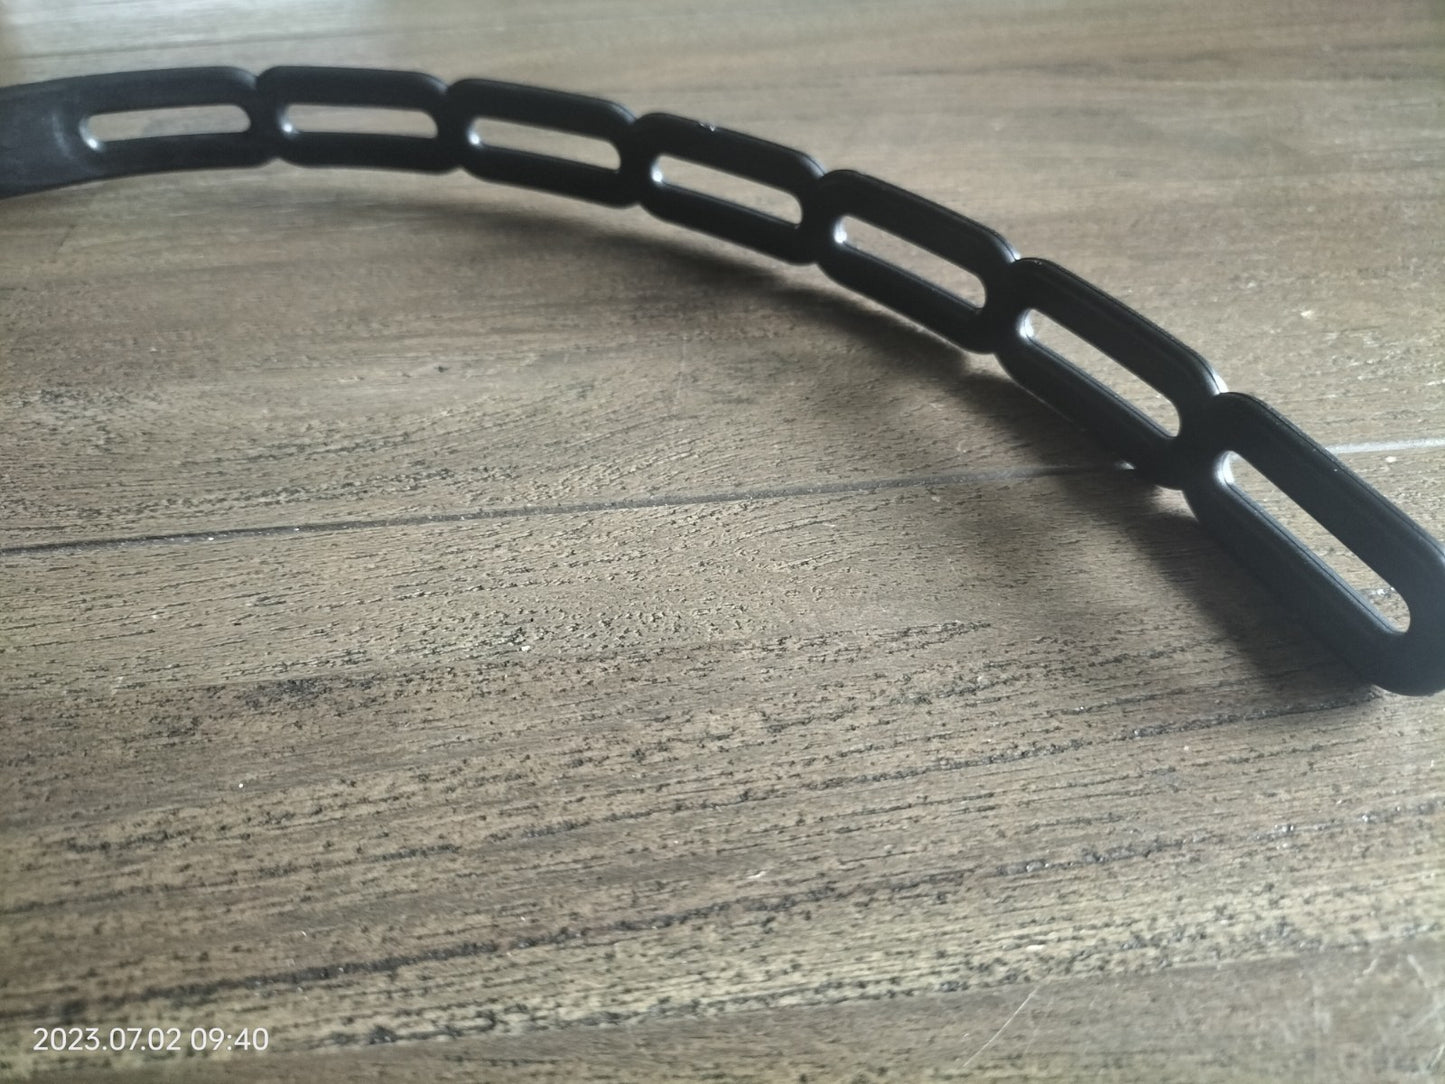 Rubber snaketail with rubber chain end